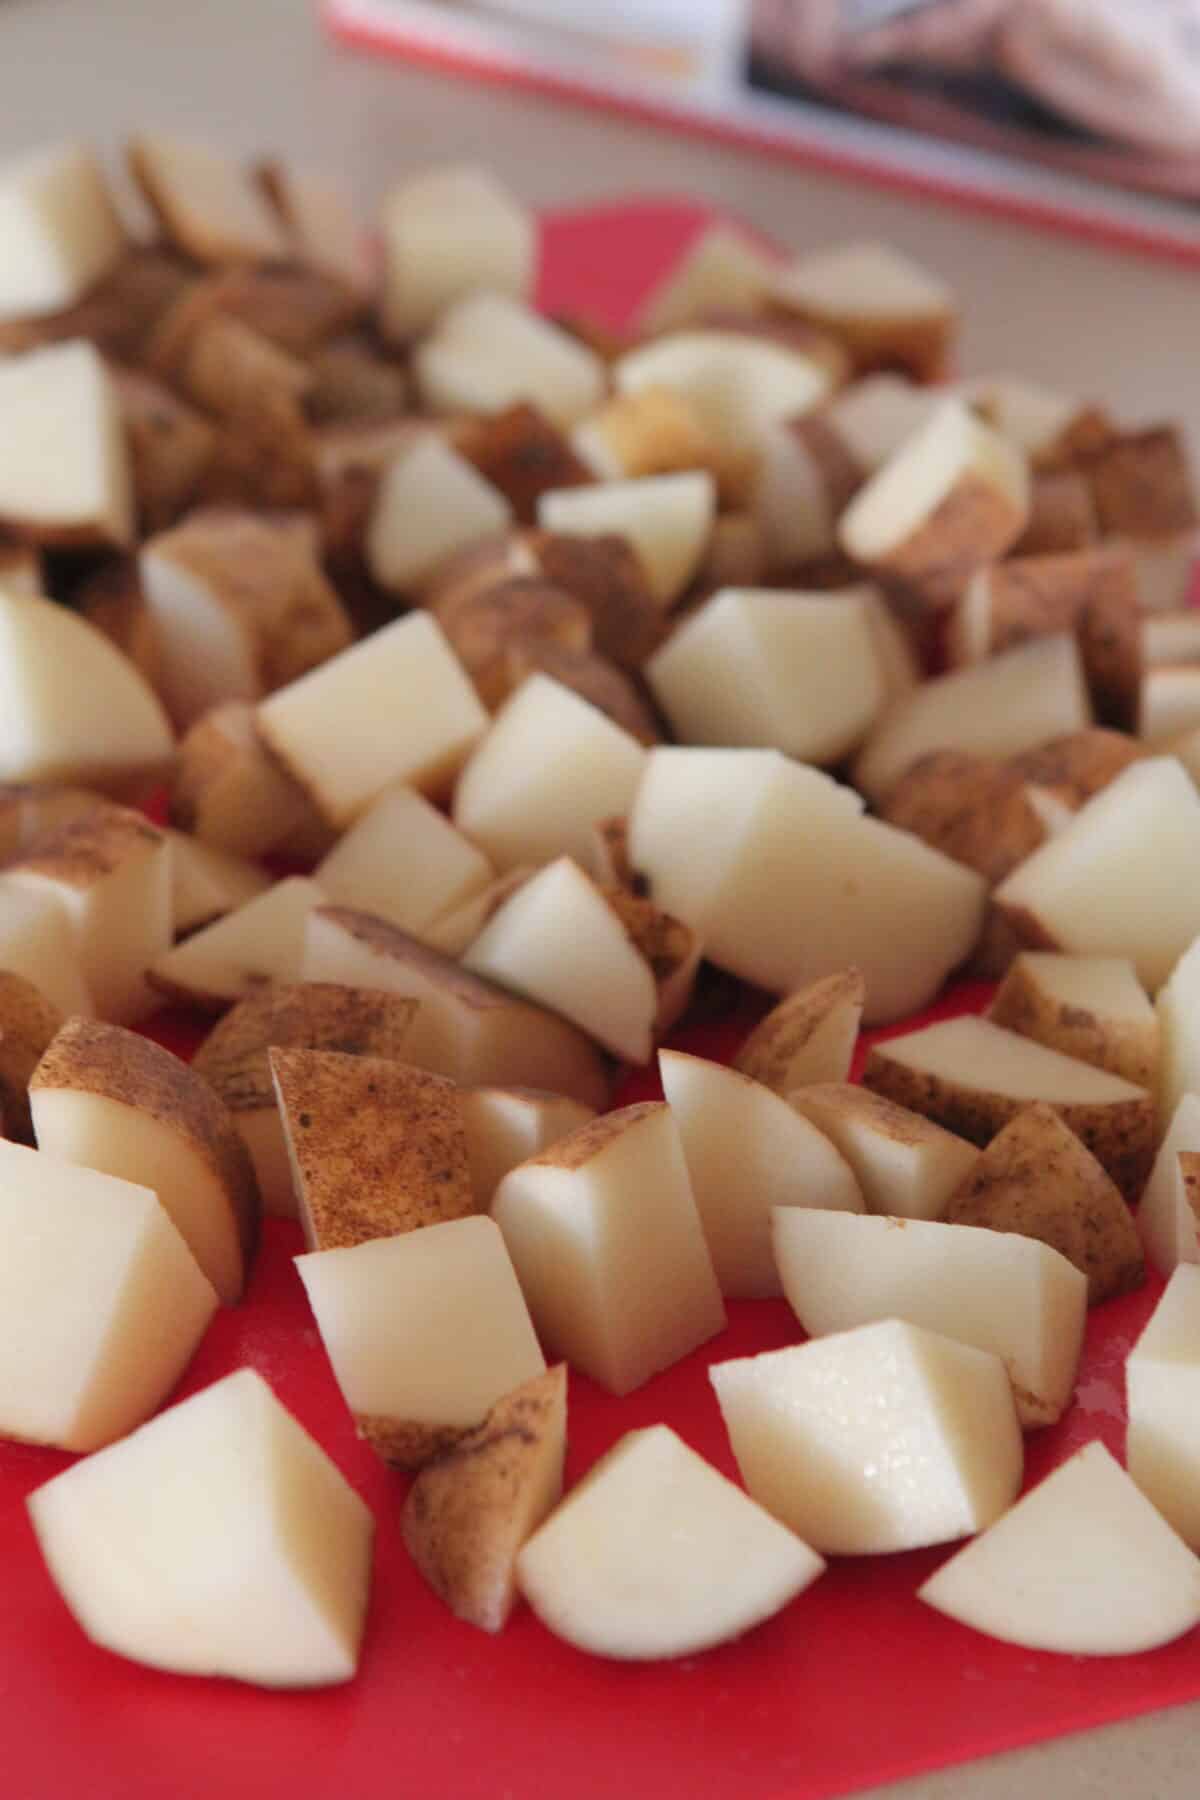 cubed potatoes on cutting board